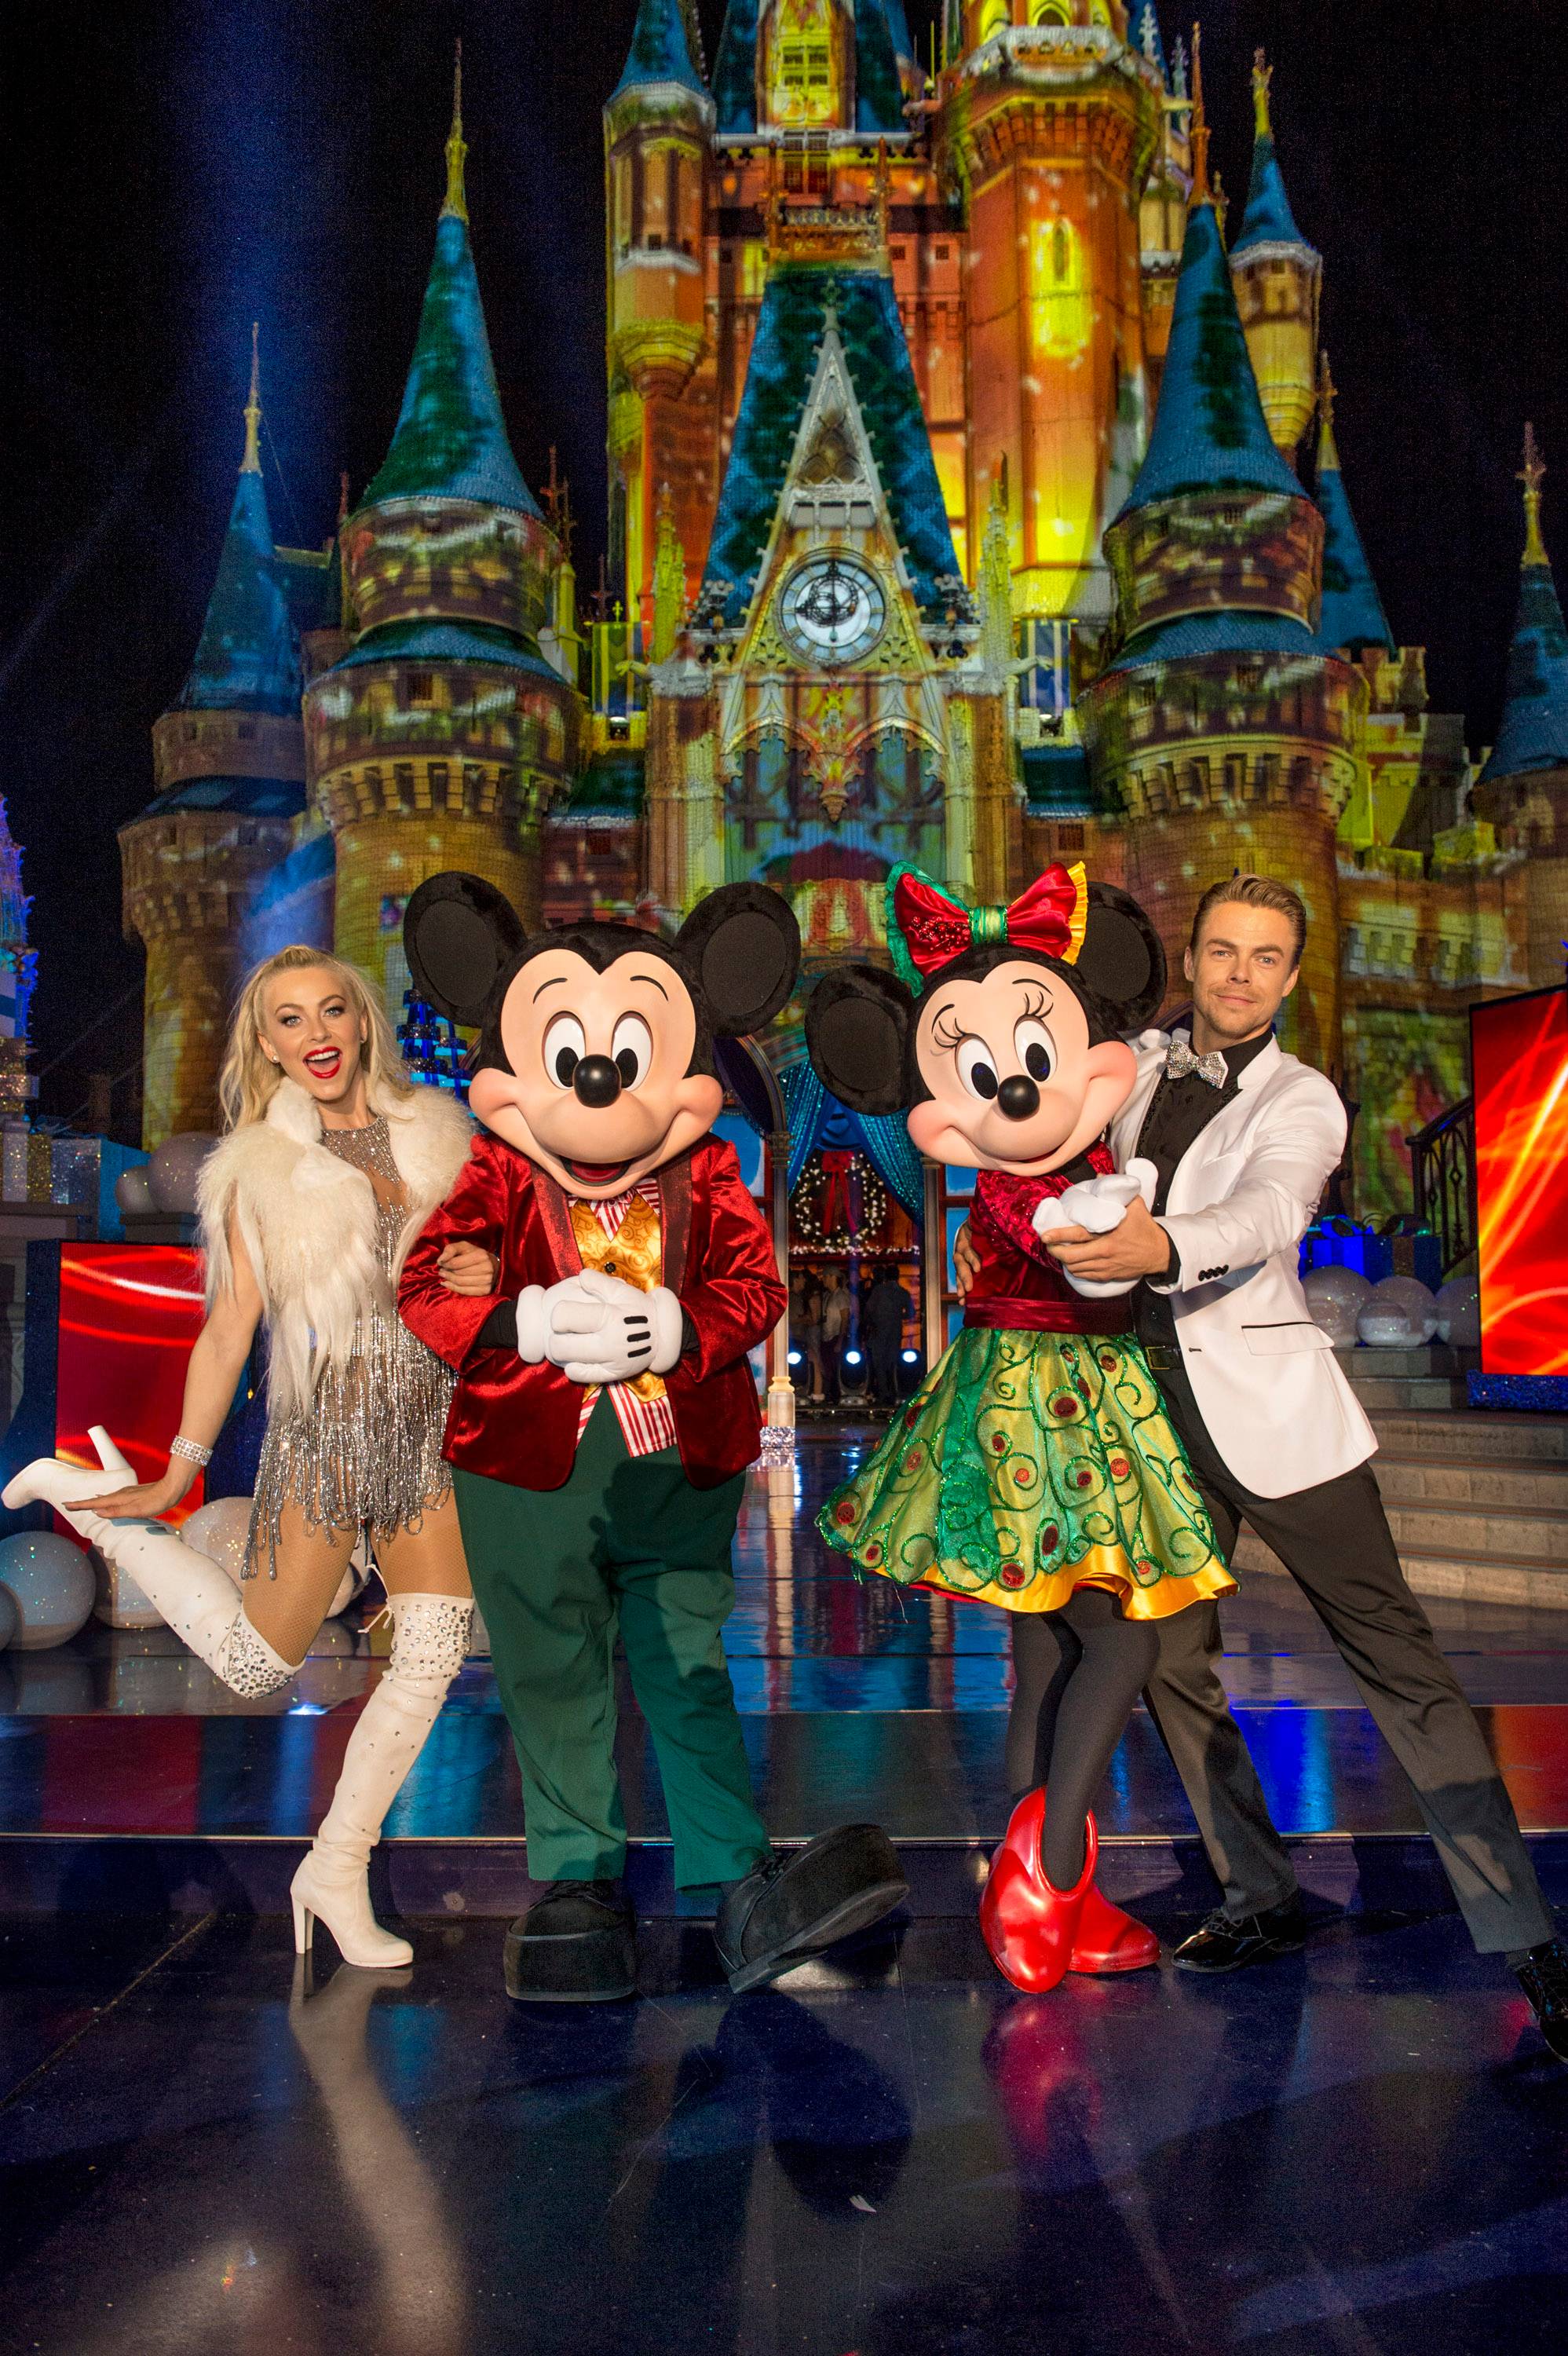 Julianne Hough and pro-dancer Derek Hough hosted the 2016 holiday specials